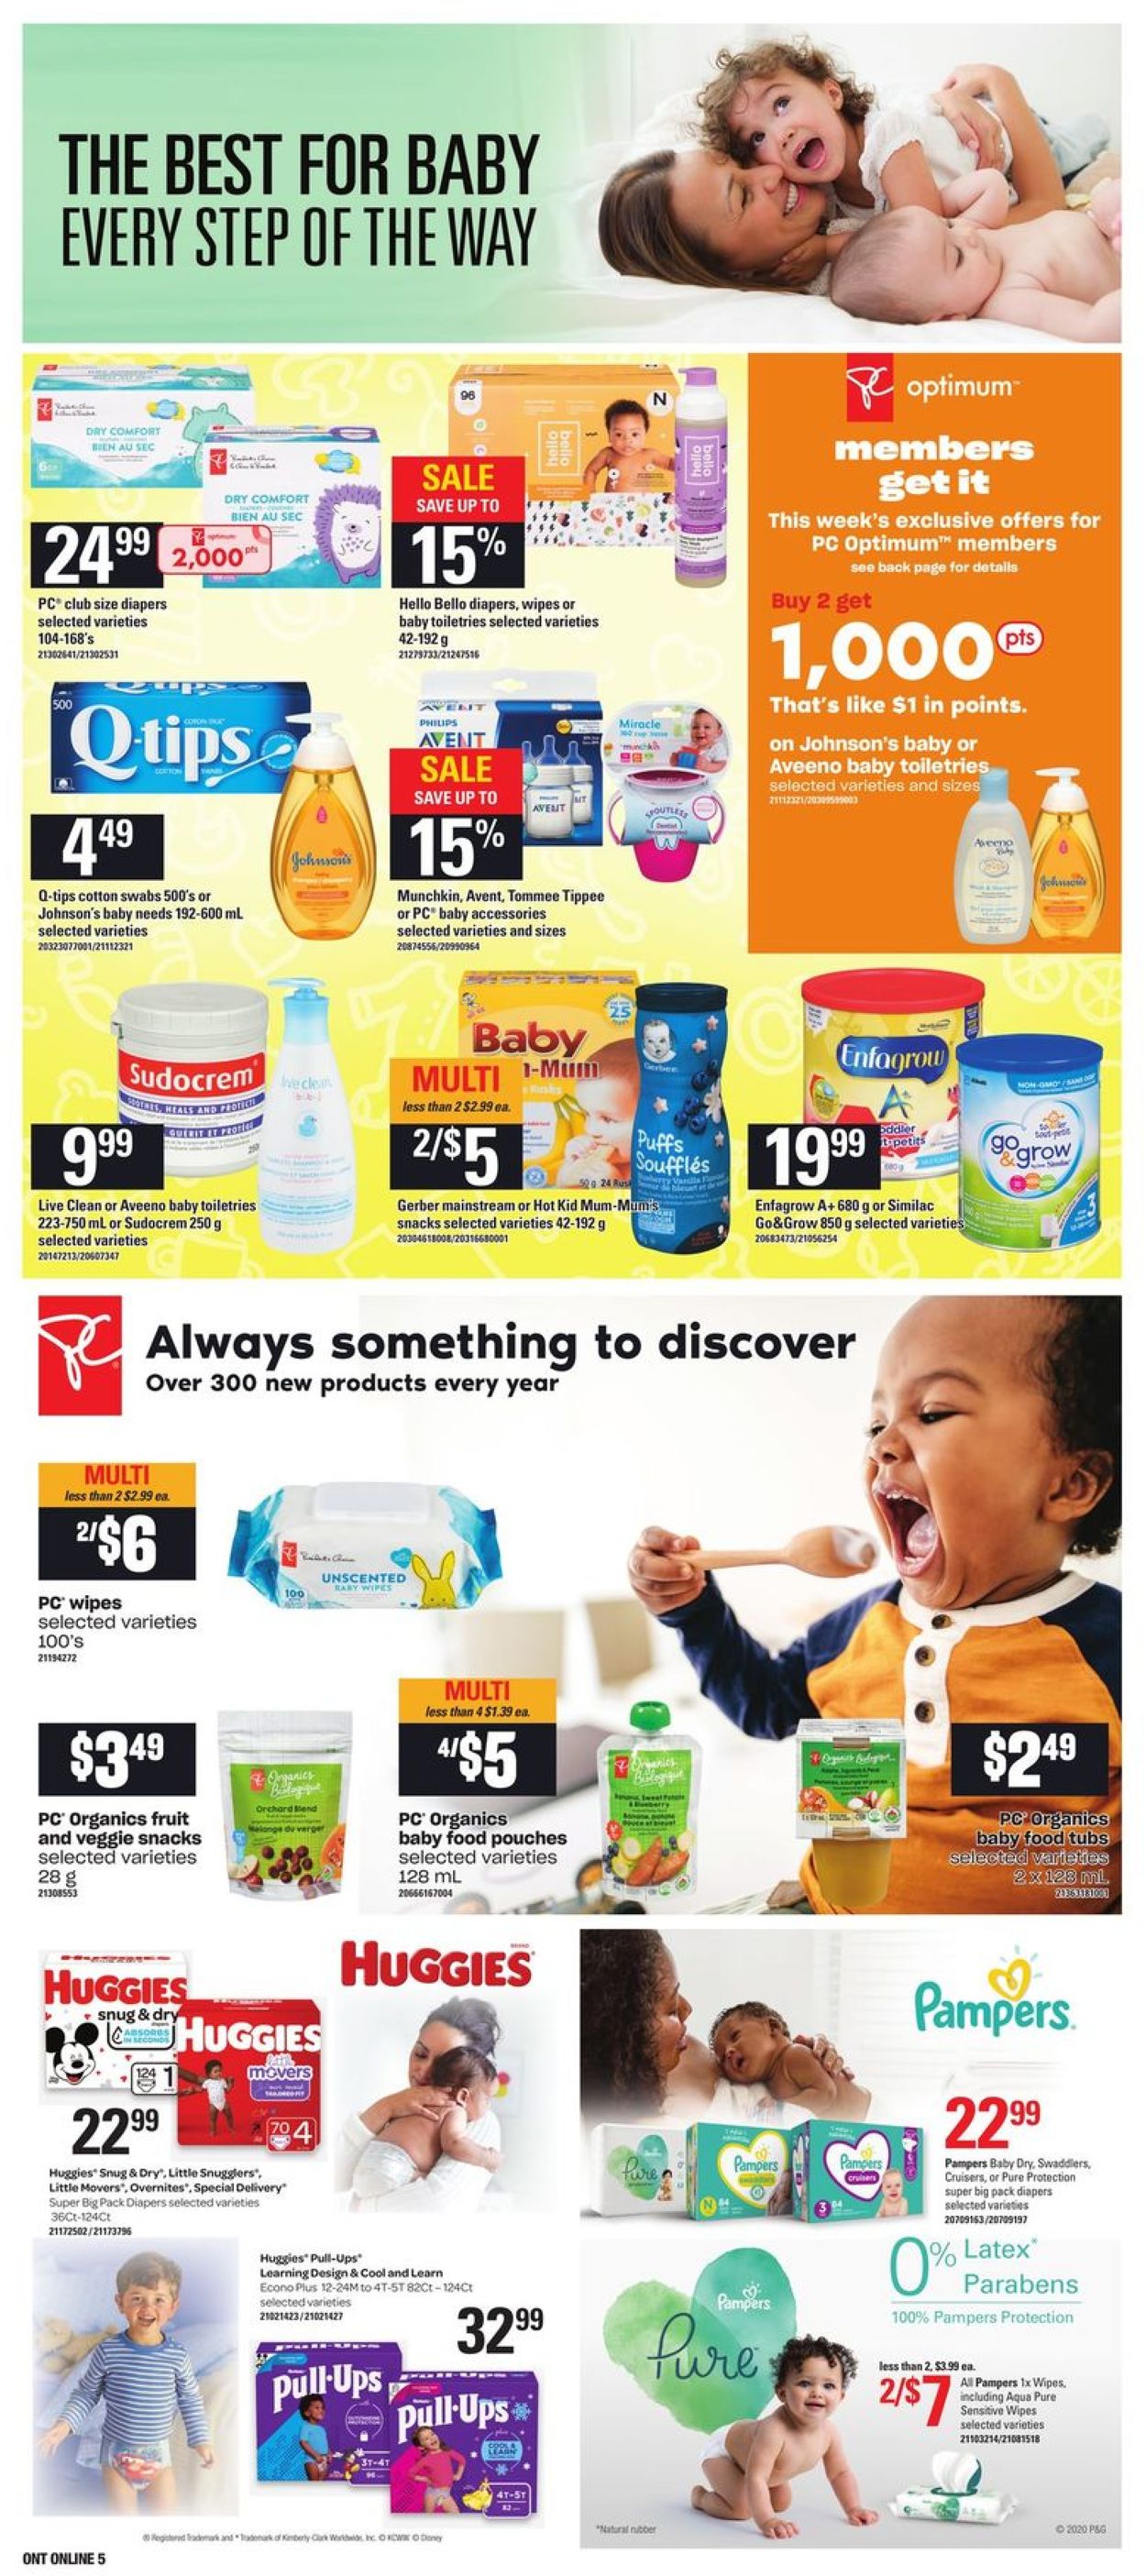 Loblaws Flyer from 04/08/2021